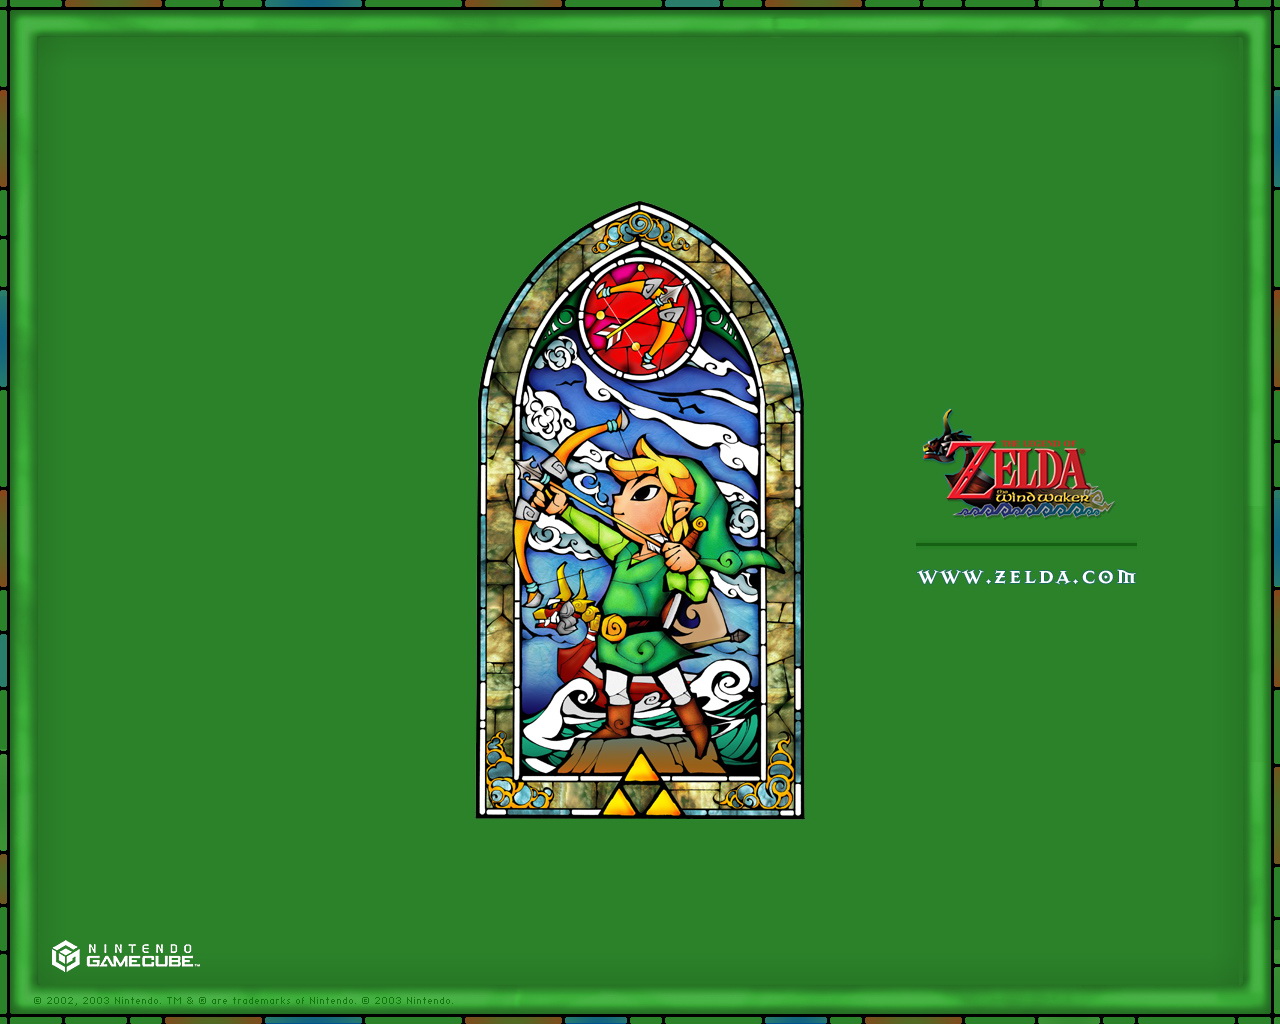 Zelda And Online Game Wallpaper Related Games